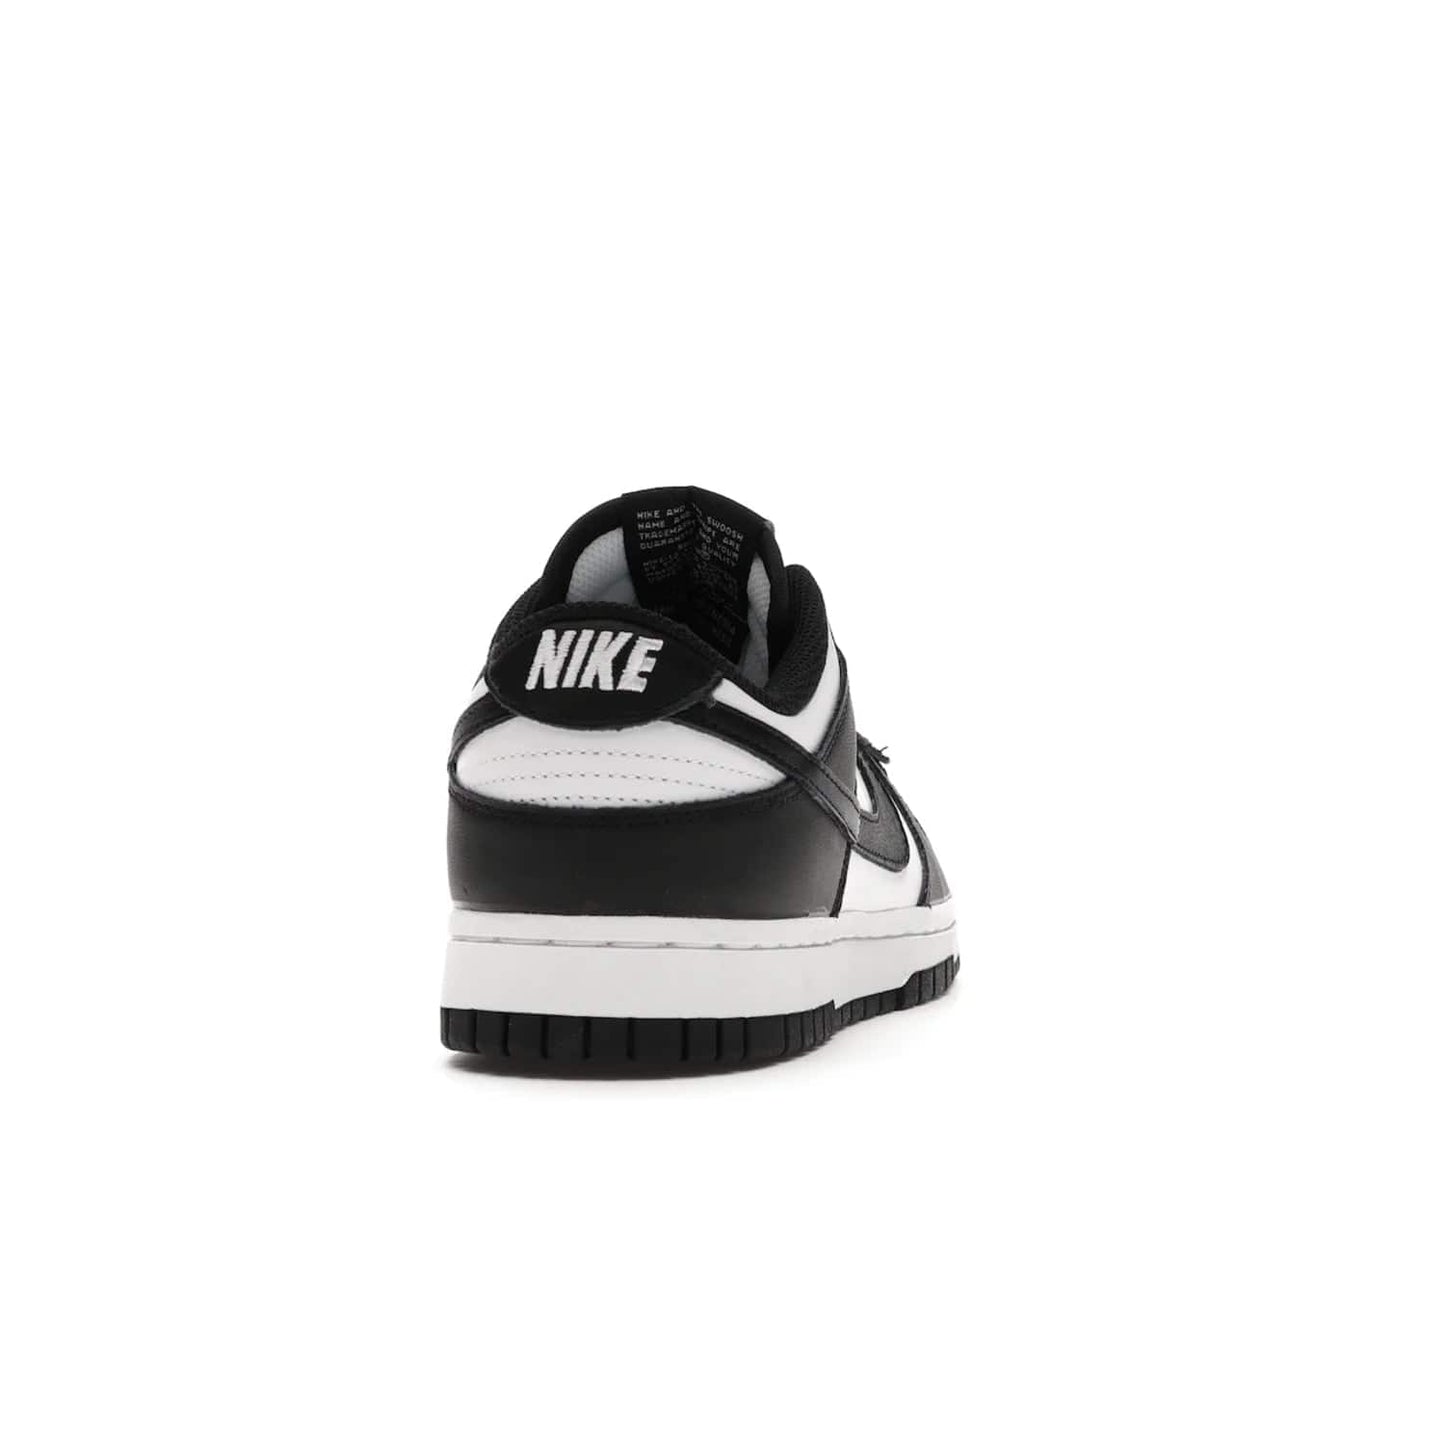 Nike Dunk Low Retro White Black Panda (2021) (Women's) - Image 29 - Only at www.BallersClubKickz.com - Say hello to the new Nike Dunk Low Retro White Black Panda (2021) (Women's)! White & black leather upper with Nike Swoosh logo. Get your pair for $100 in March 2021! Shop now!